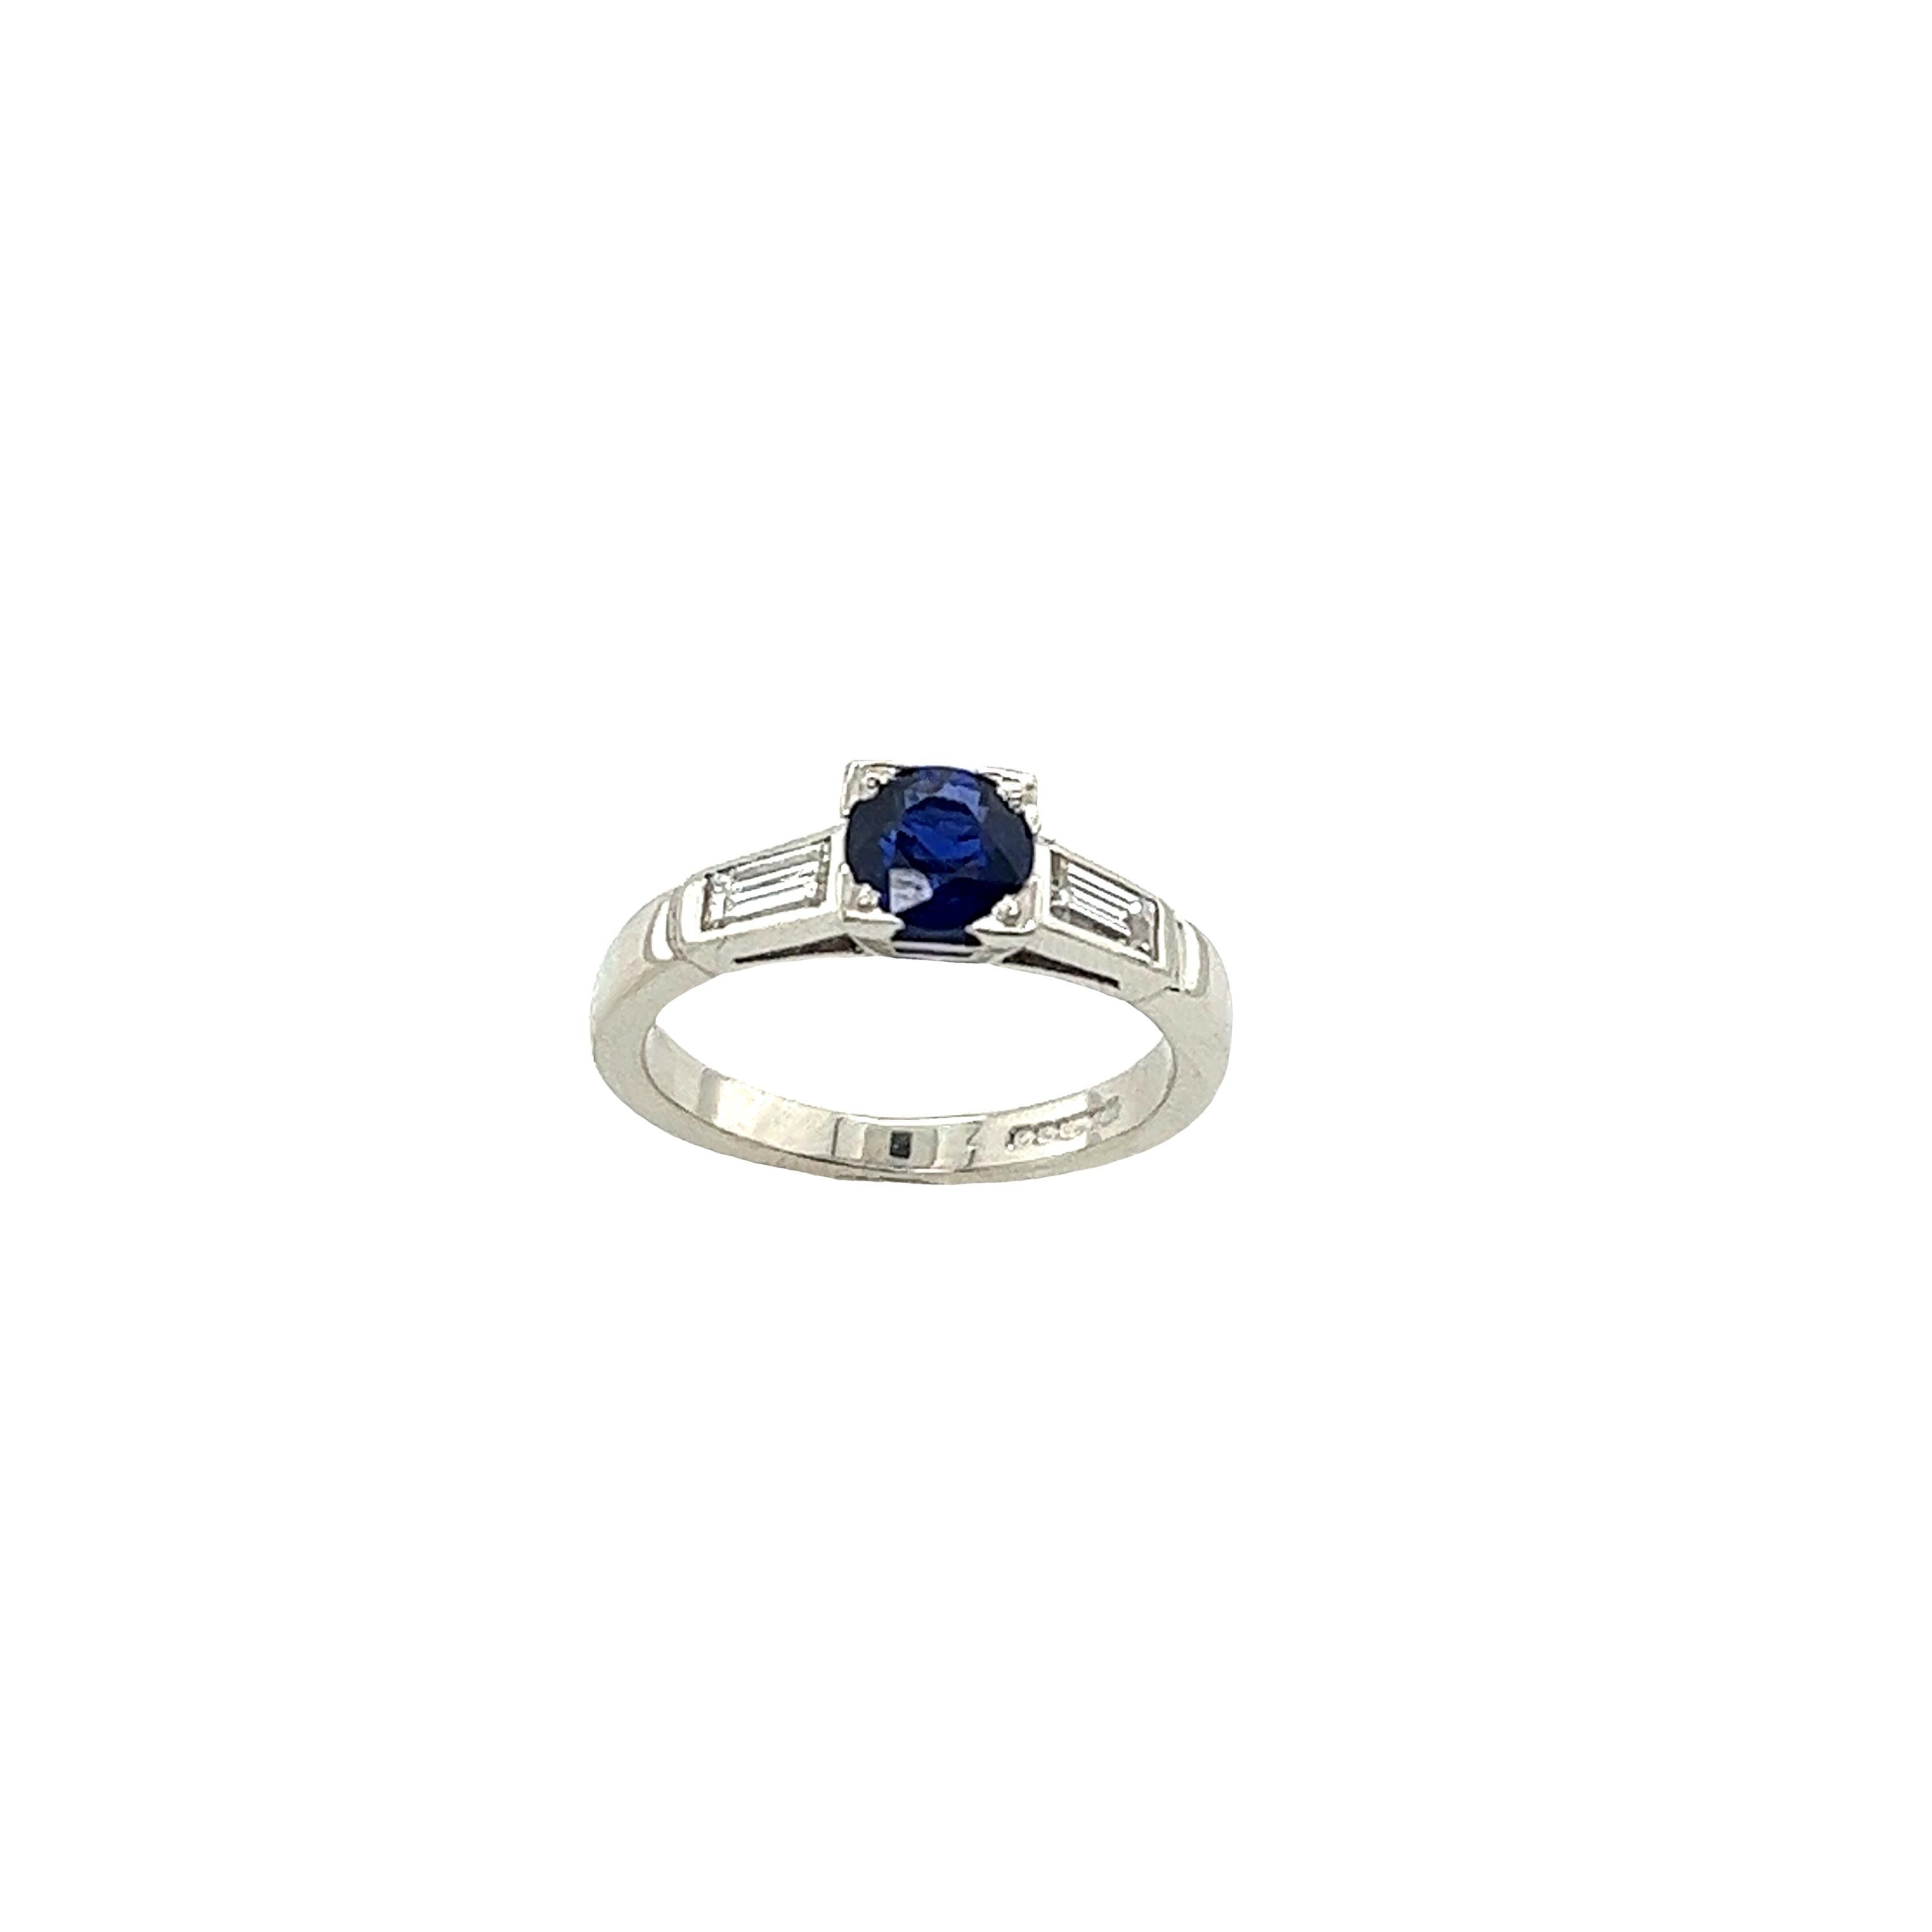 Round Cut Platinum 0.60ct Sapphire & Diamond Ring Set With 2 Baguettes Diamonds on Sides For Sale